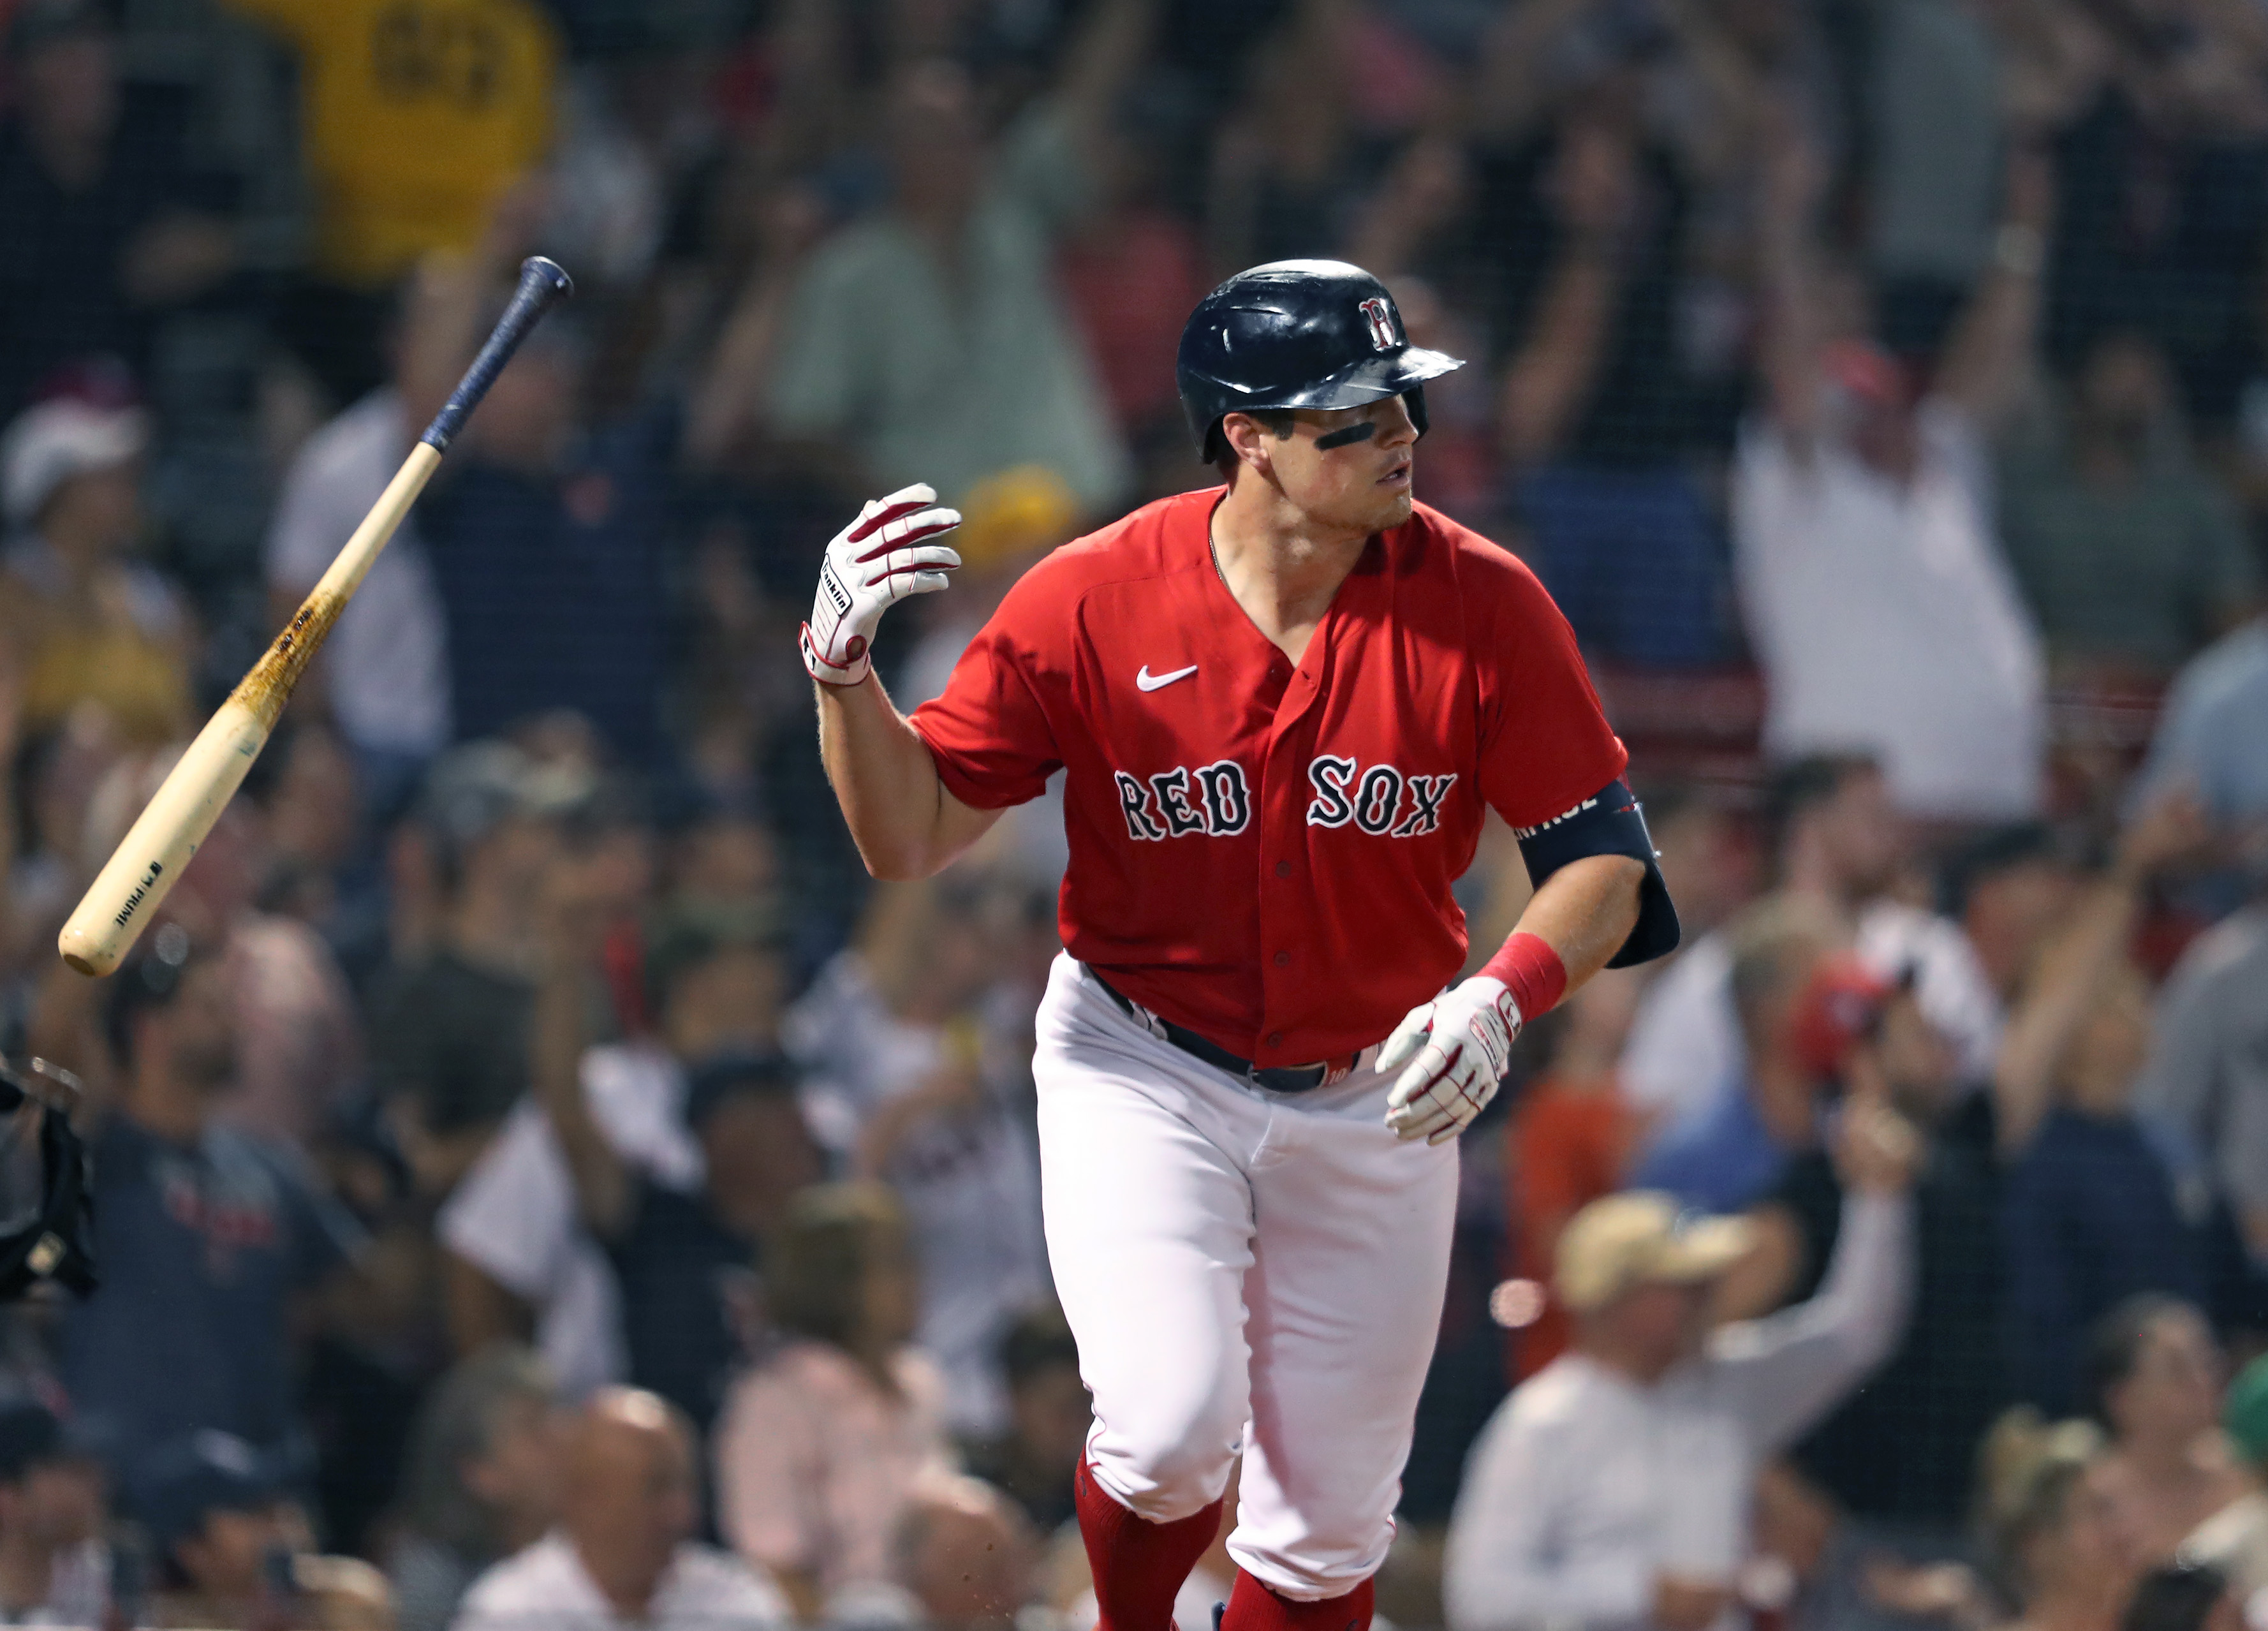 Hunter Renfroe joins the list of Red Sox one-year wonders